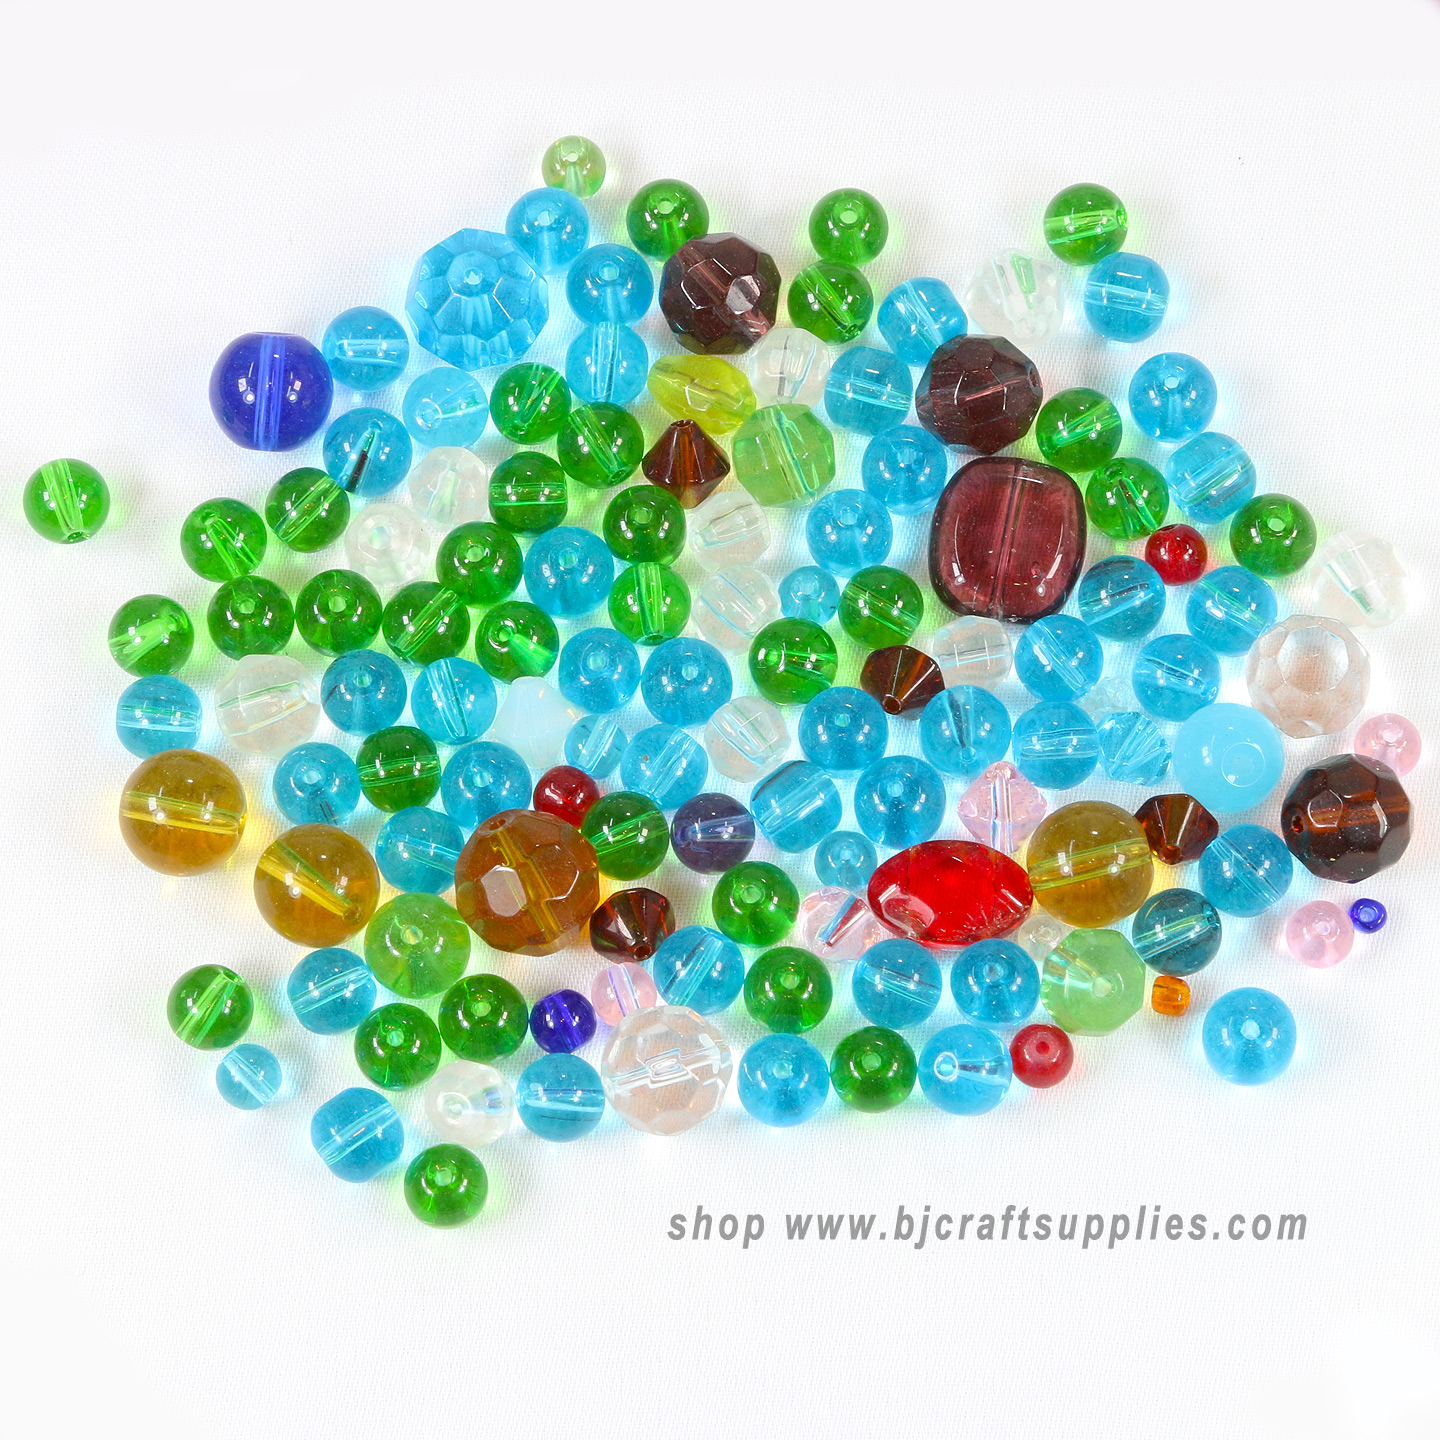 Colored Glass Beads - Glass Bead Assortment